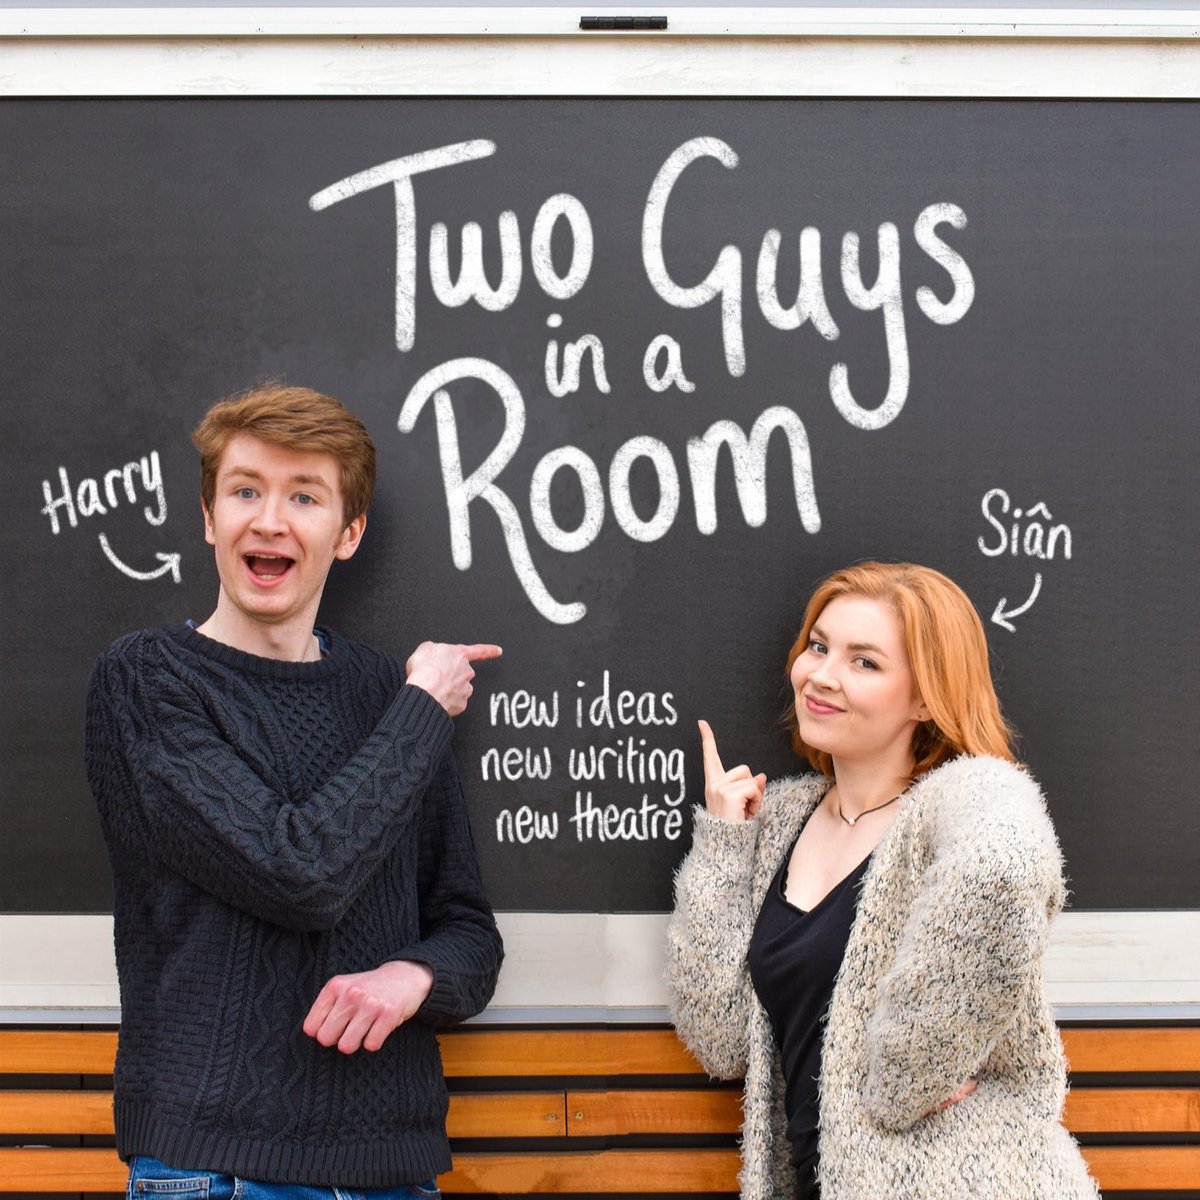 We chatted with Harry and Siân over at TWO GUYS IN A ROOM about their brand new show MONUMENTUM coming to #breadandrosestheatre next week! MONUMENTUM is a drama about faith, grief, capitalism and quantum physics. Find out more in our interview 🗞️ breadandrosestheatre.co.uk/news/monumentu…